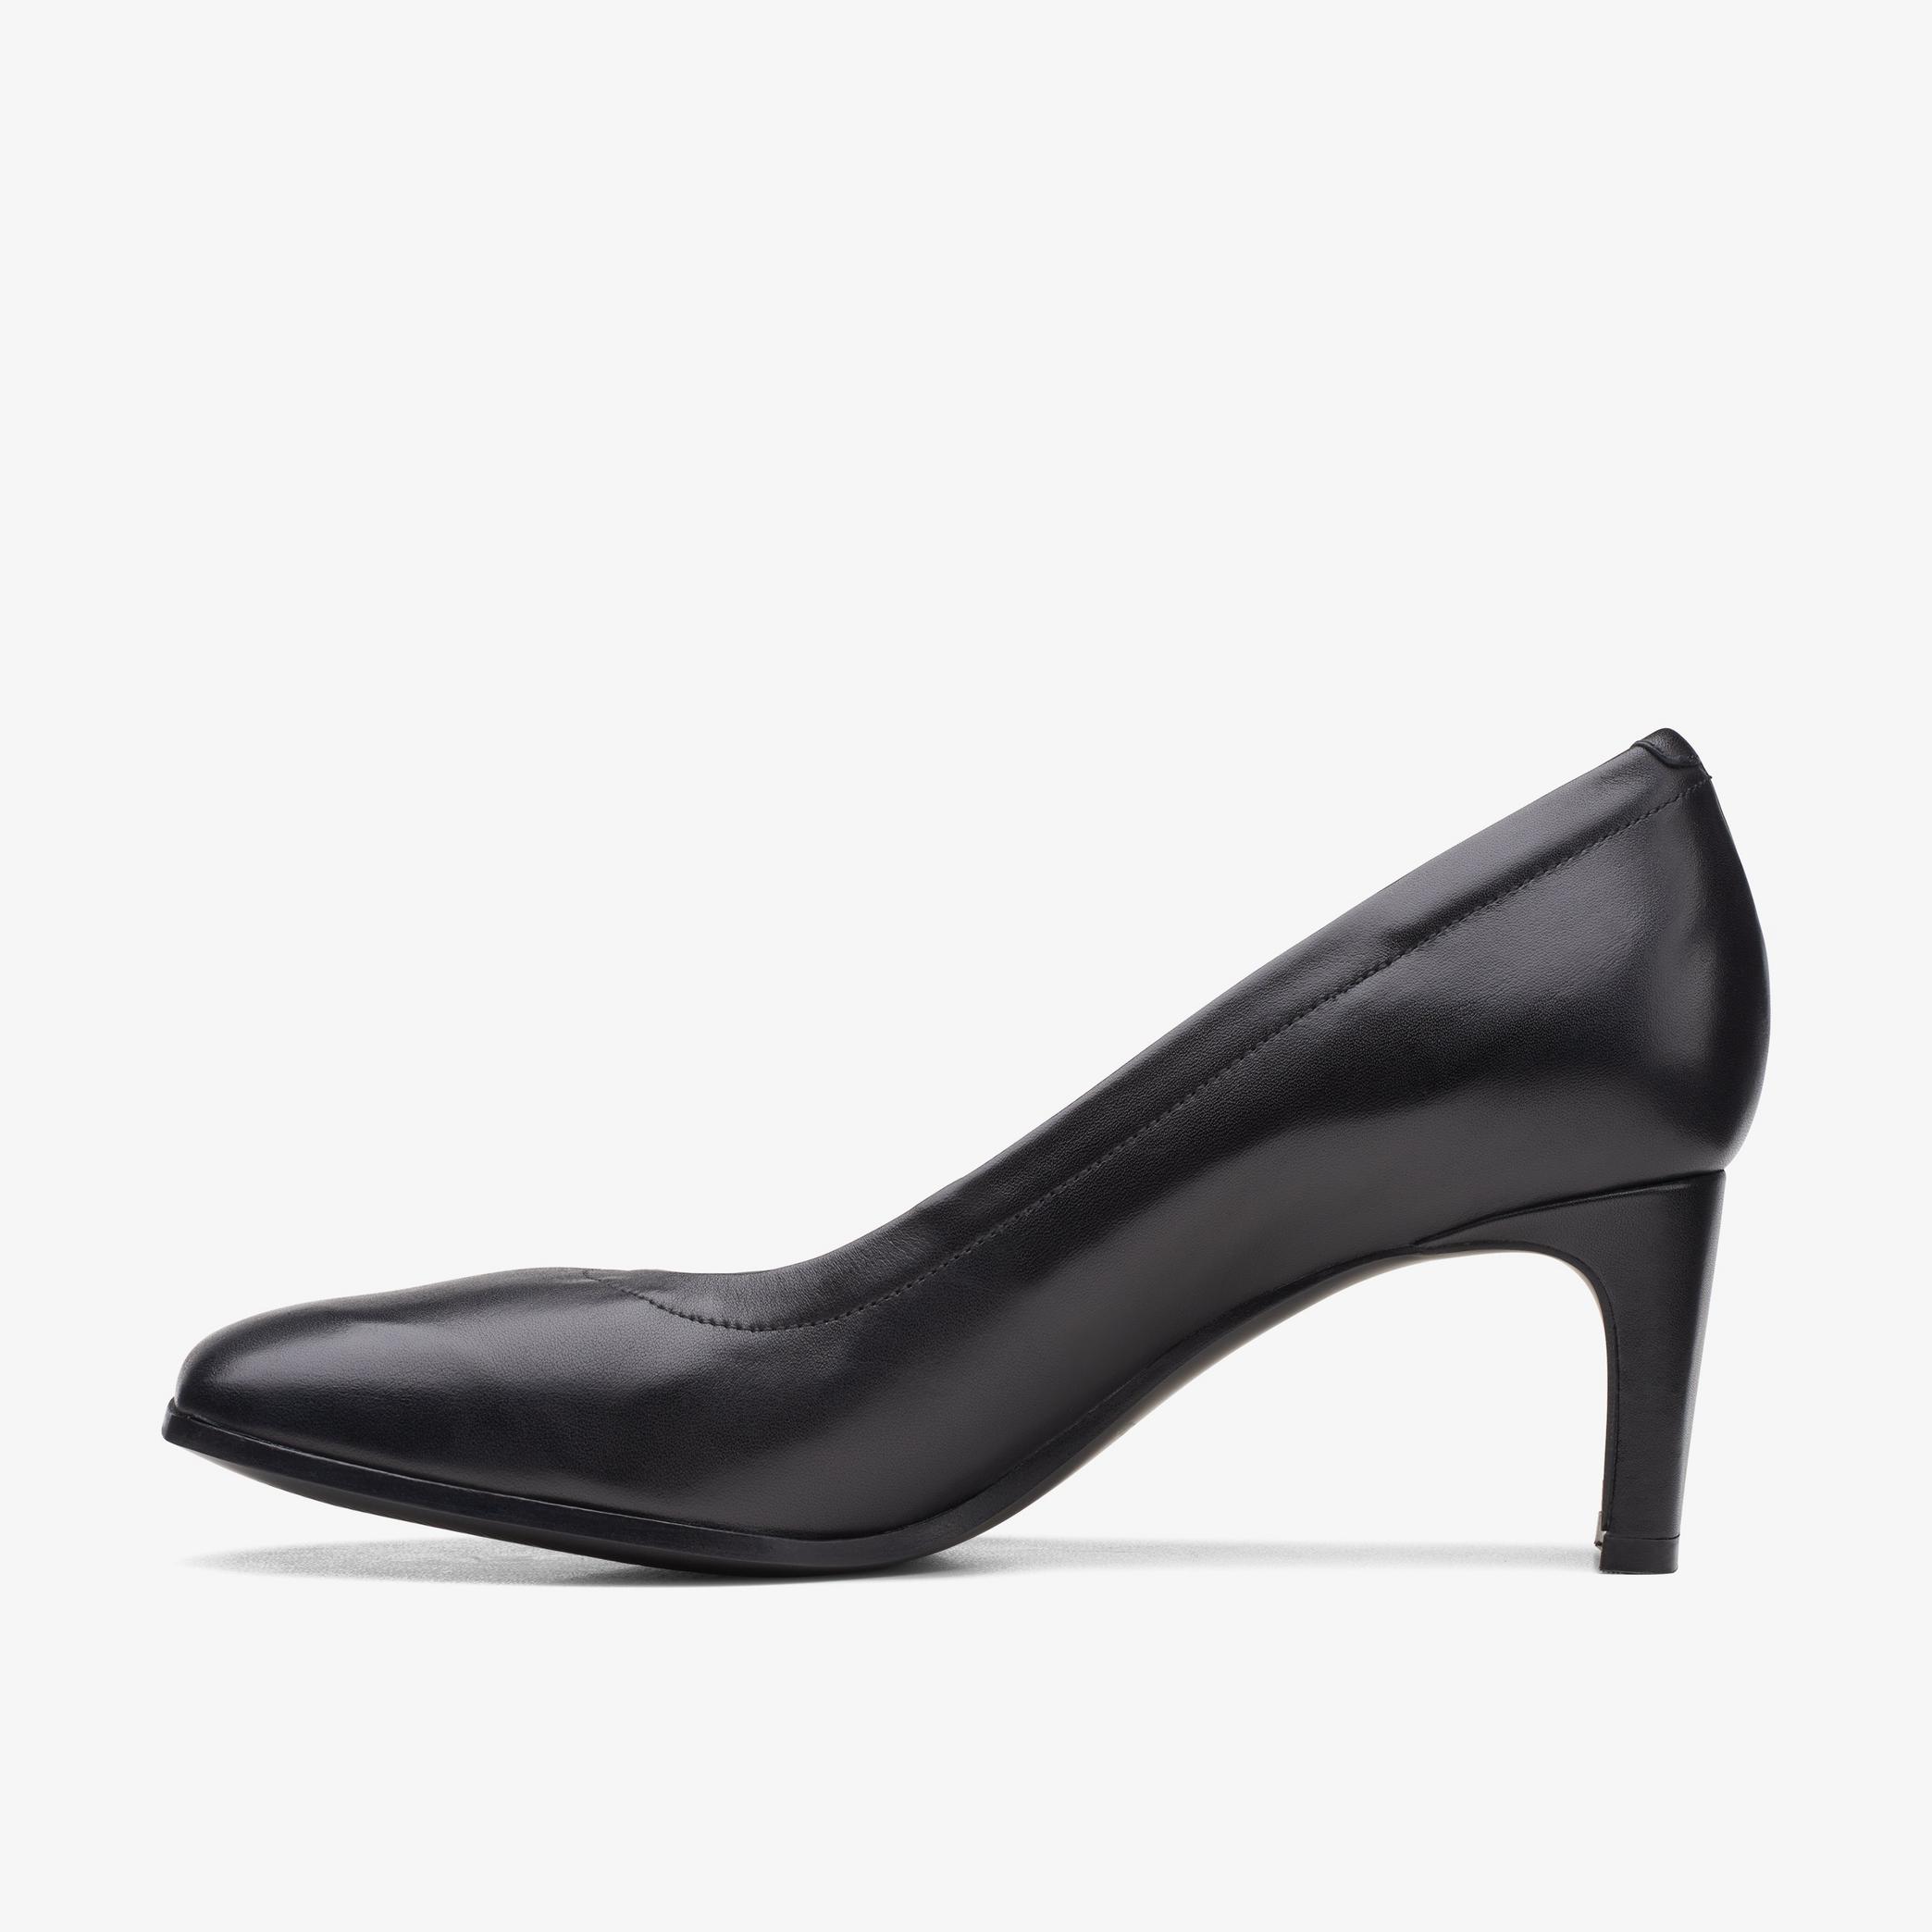 Seren55 Soft Black Leather Court Shoes, view 2 of 6